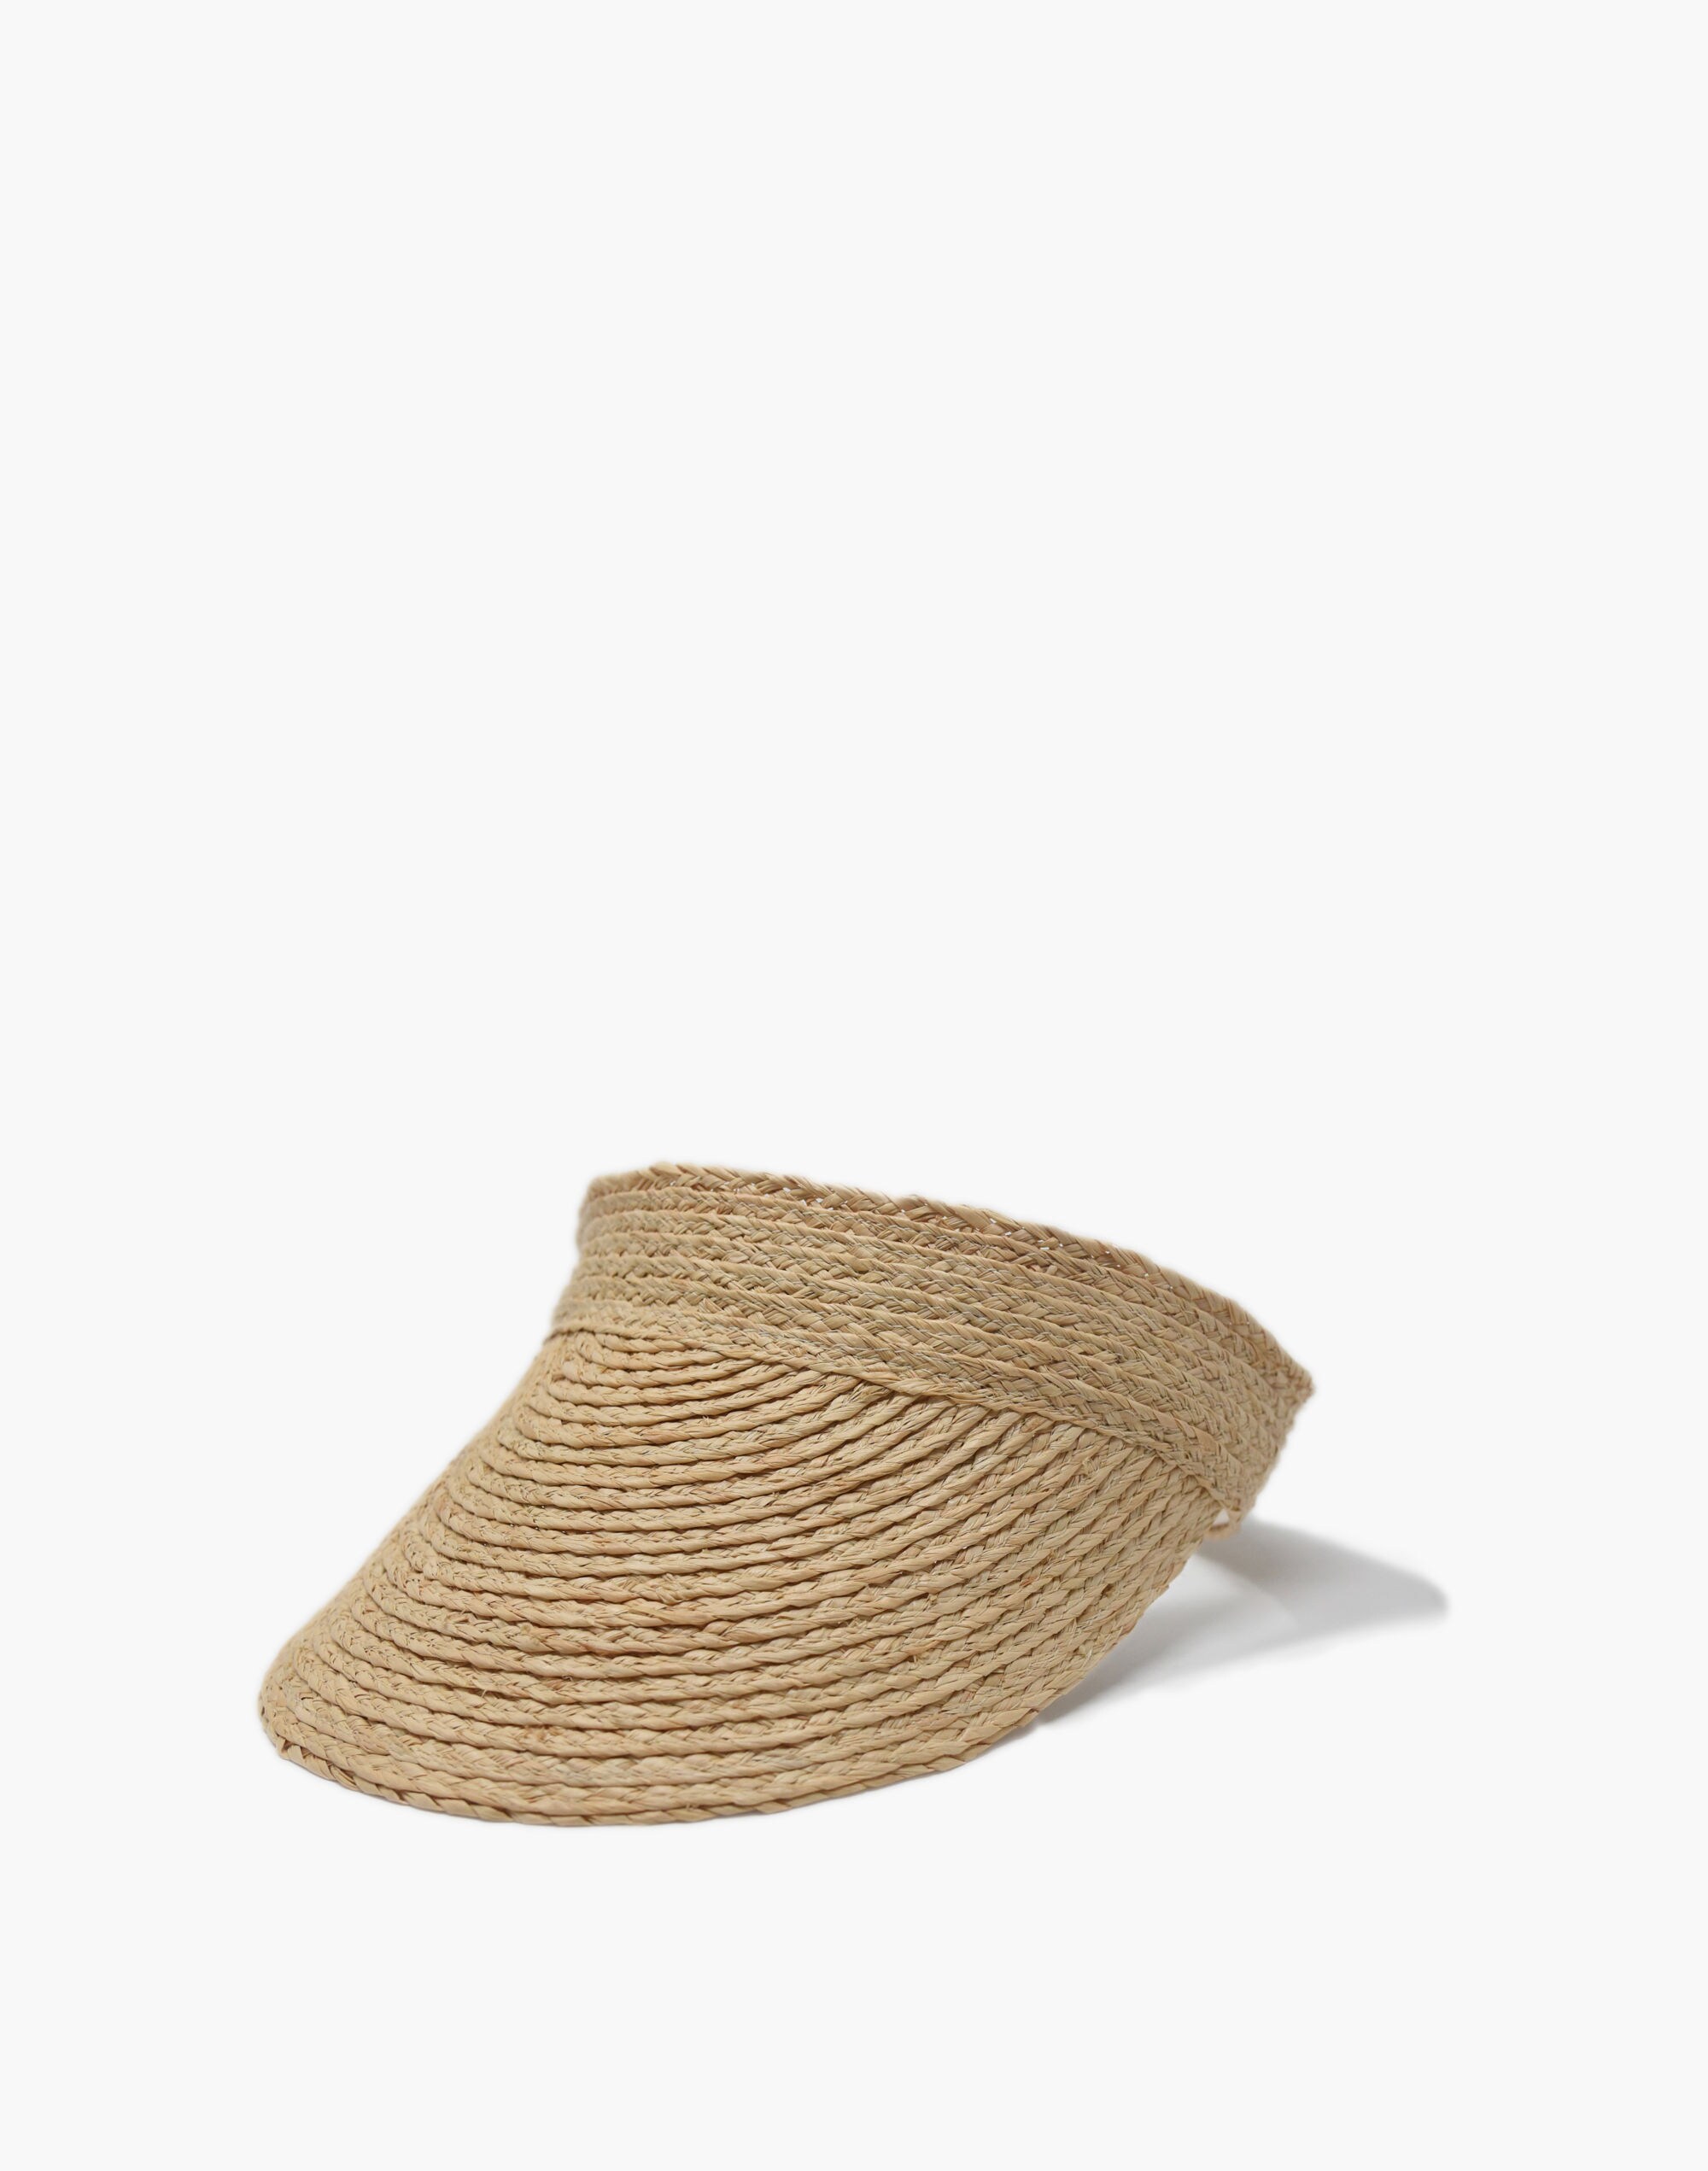 WYETH™ Courtney Packable Fedora Hat